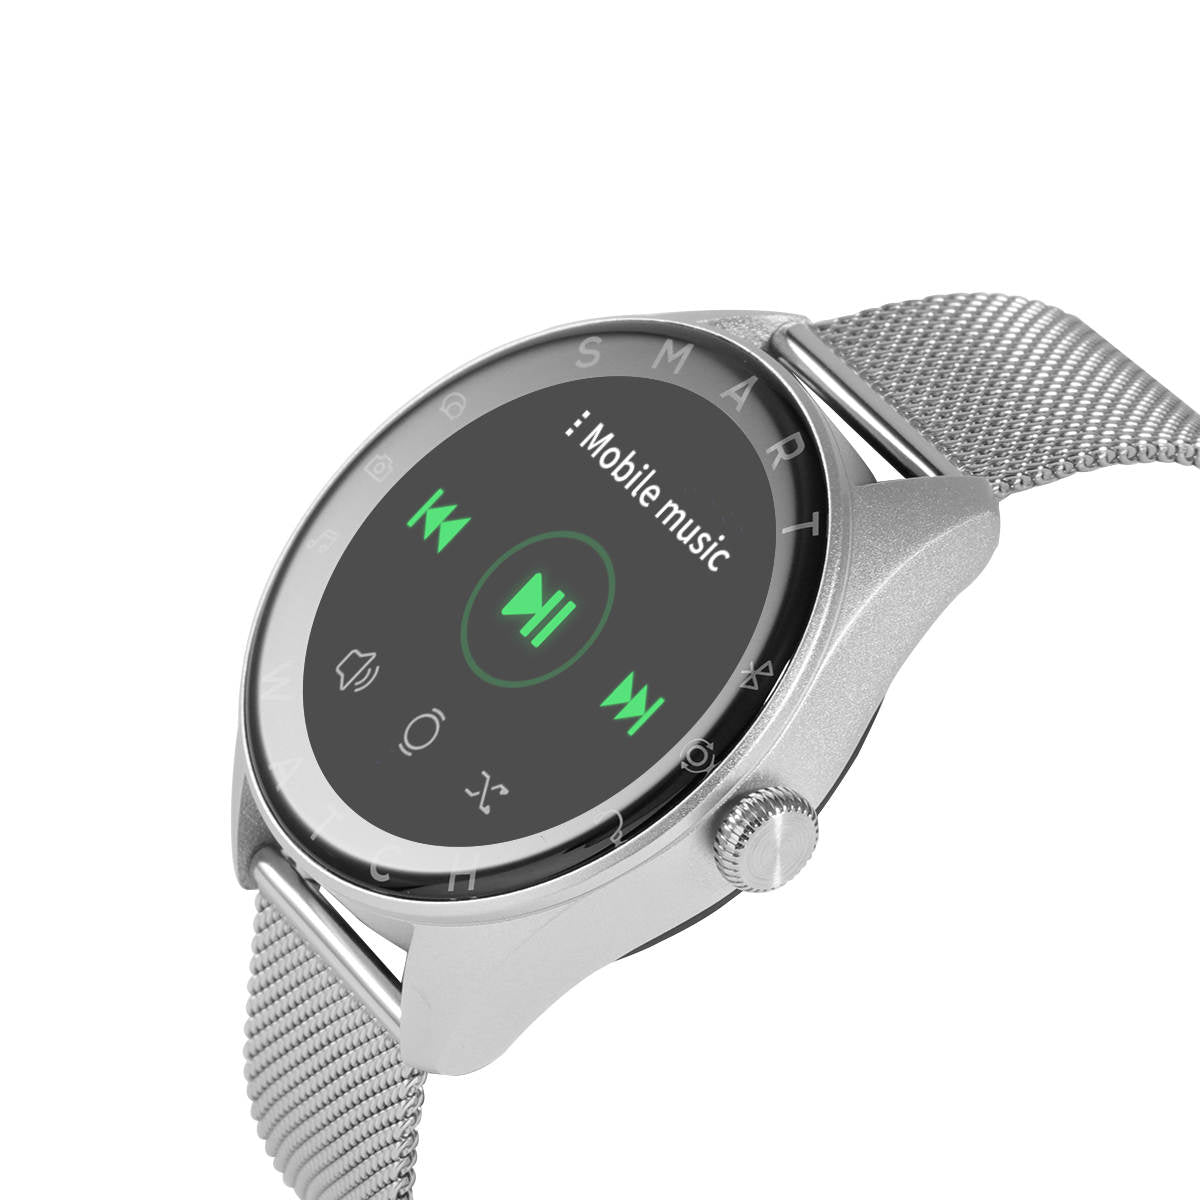 Smart Watch for Women and Men's with Bluetooth Calling +store more than 500 songs in the⌚️